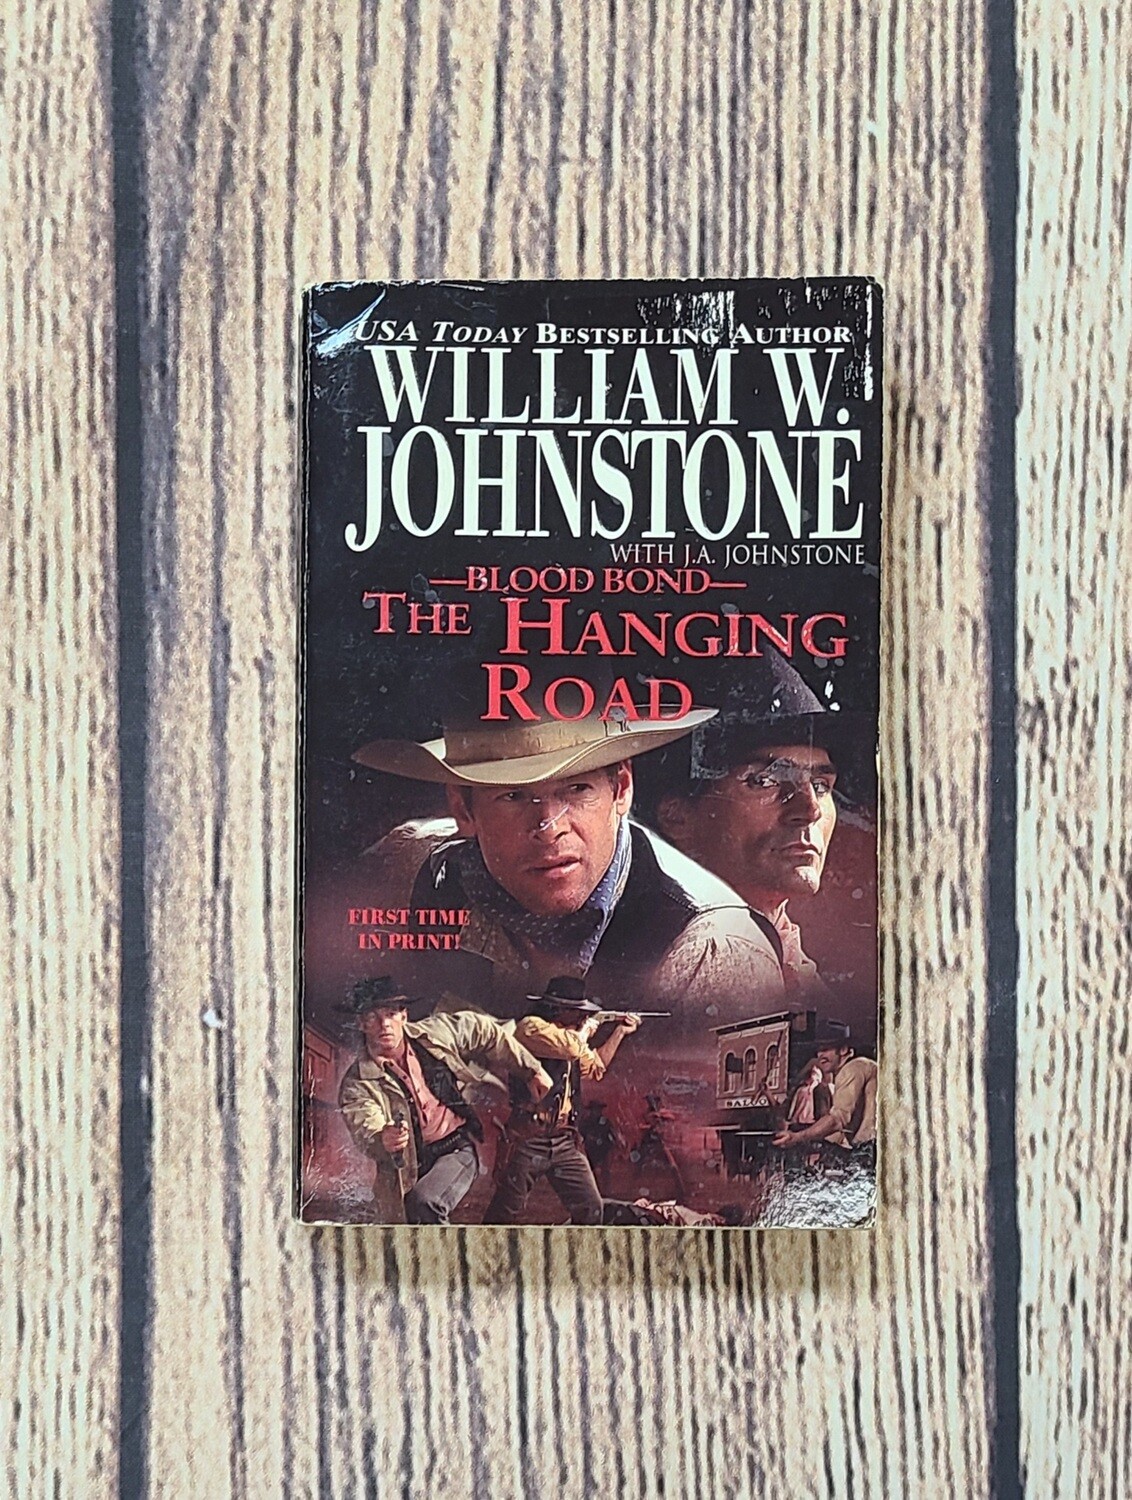 Blood Bond: The Hanging Road by William W. Johnstone with J.A. Johnstone